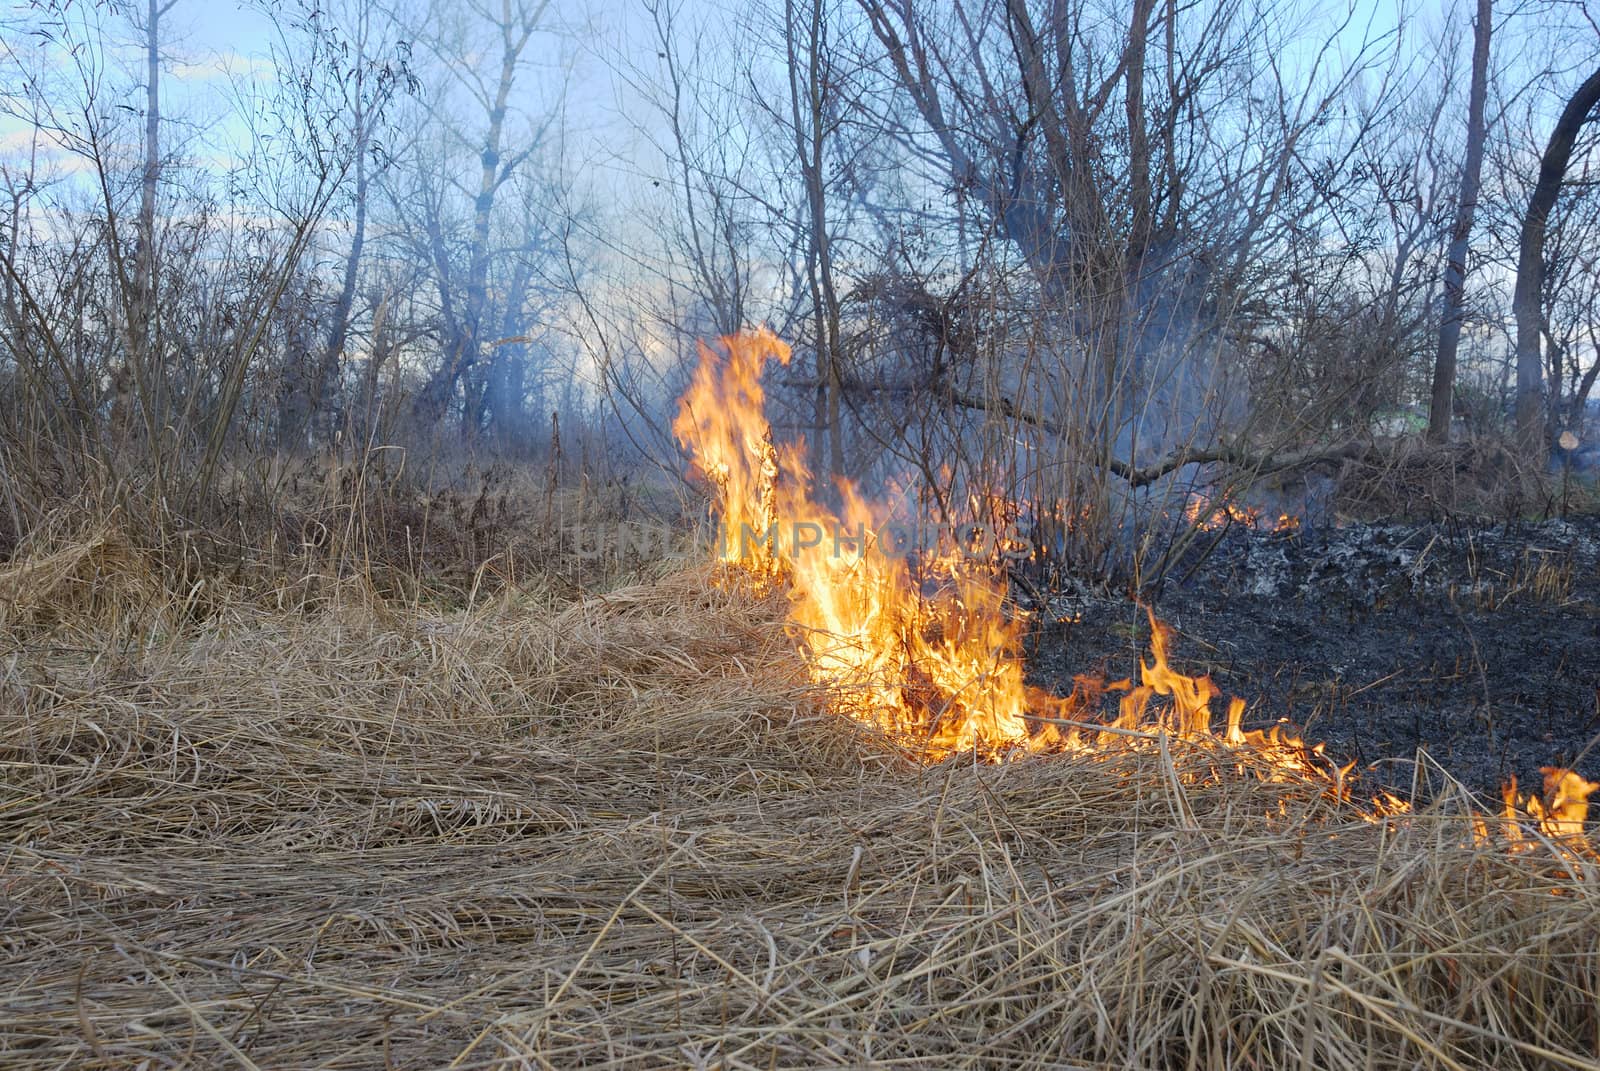 Fire is burning dry grass and bushes.